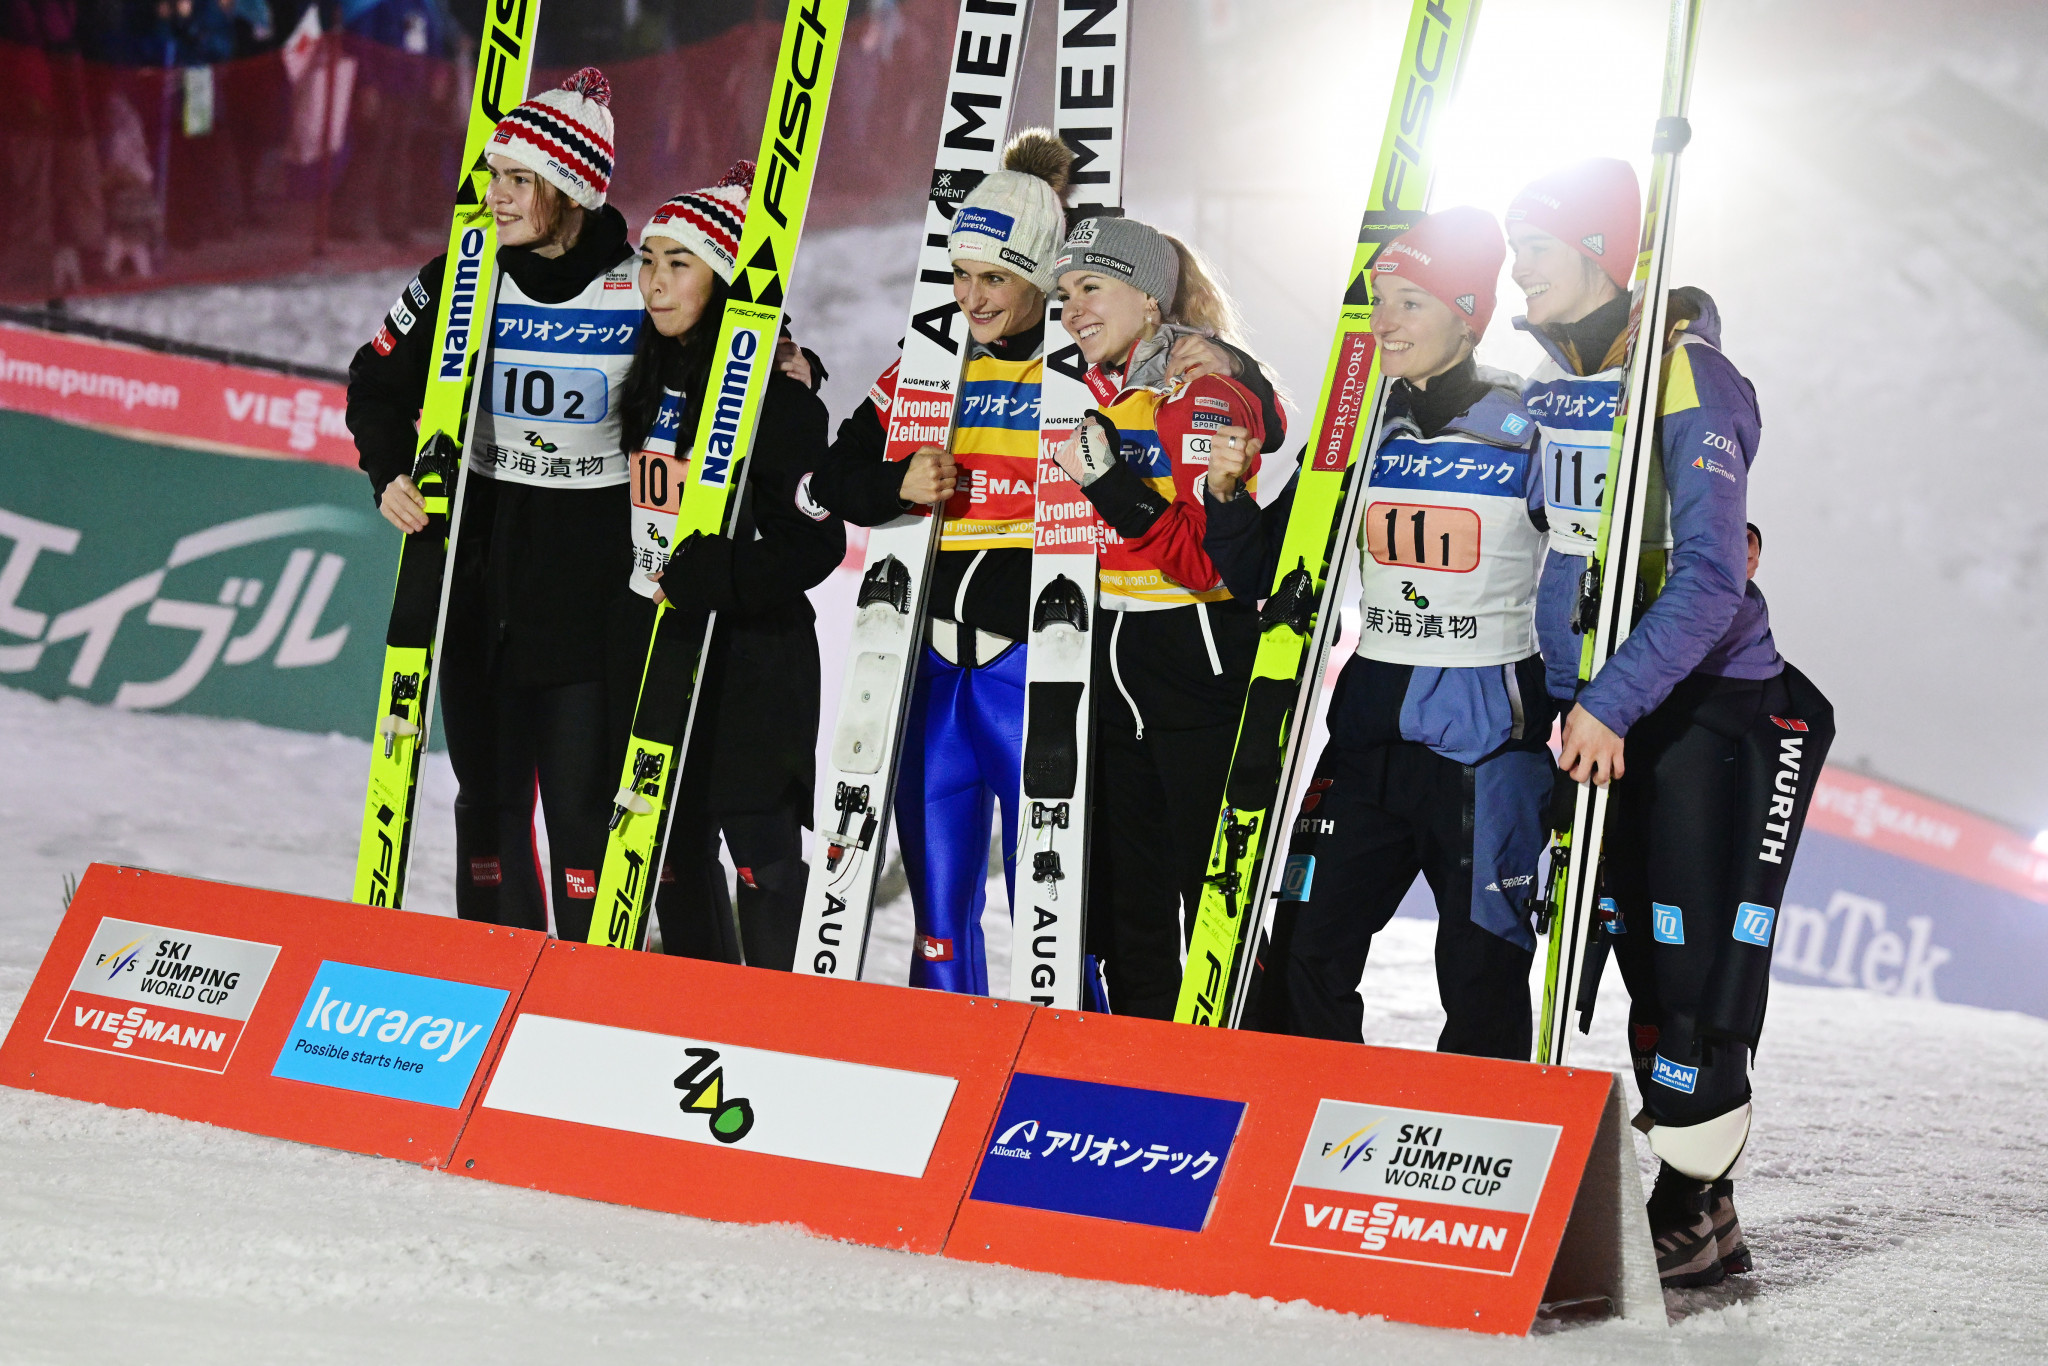 Austria topped the podium in the women's team HS102 event at the Ski Jumping World Cup in Zao ©Getty Images 